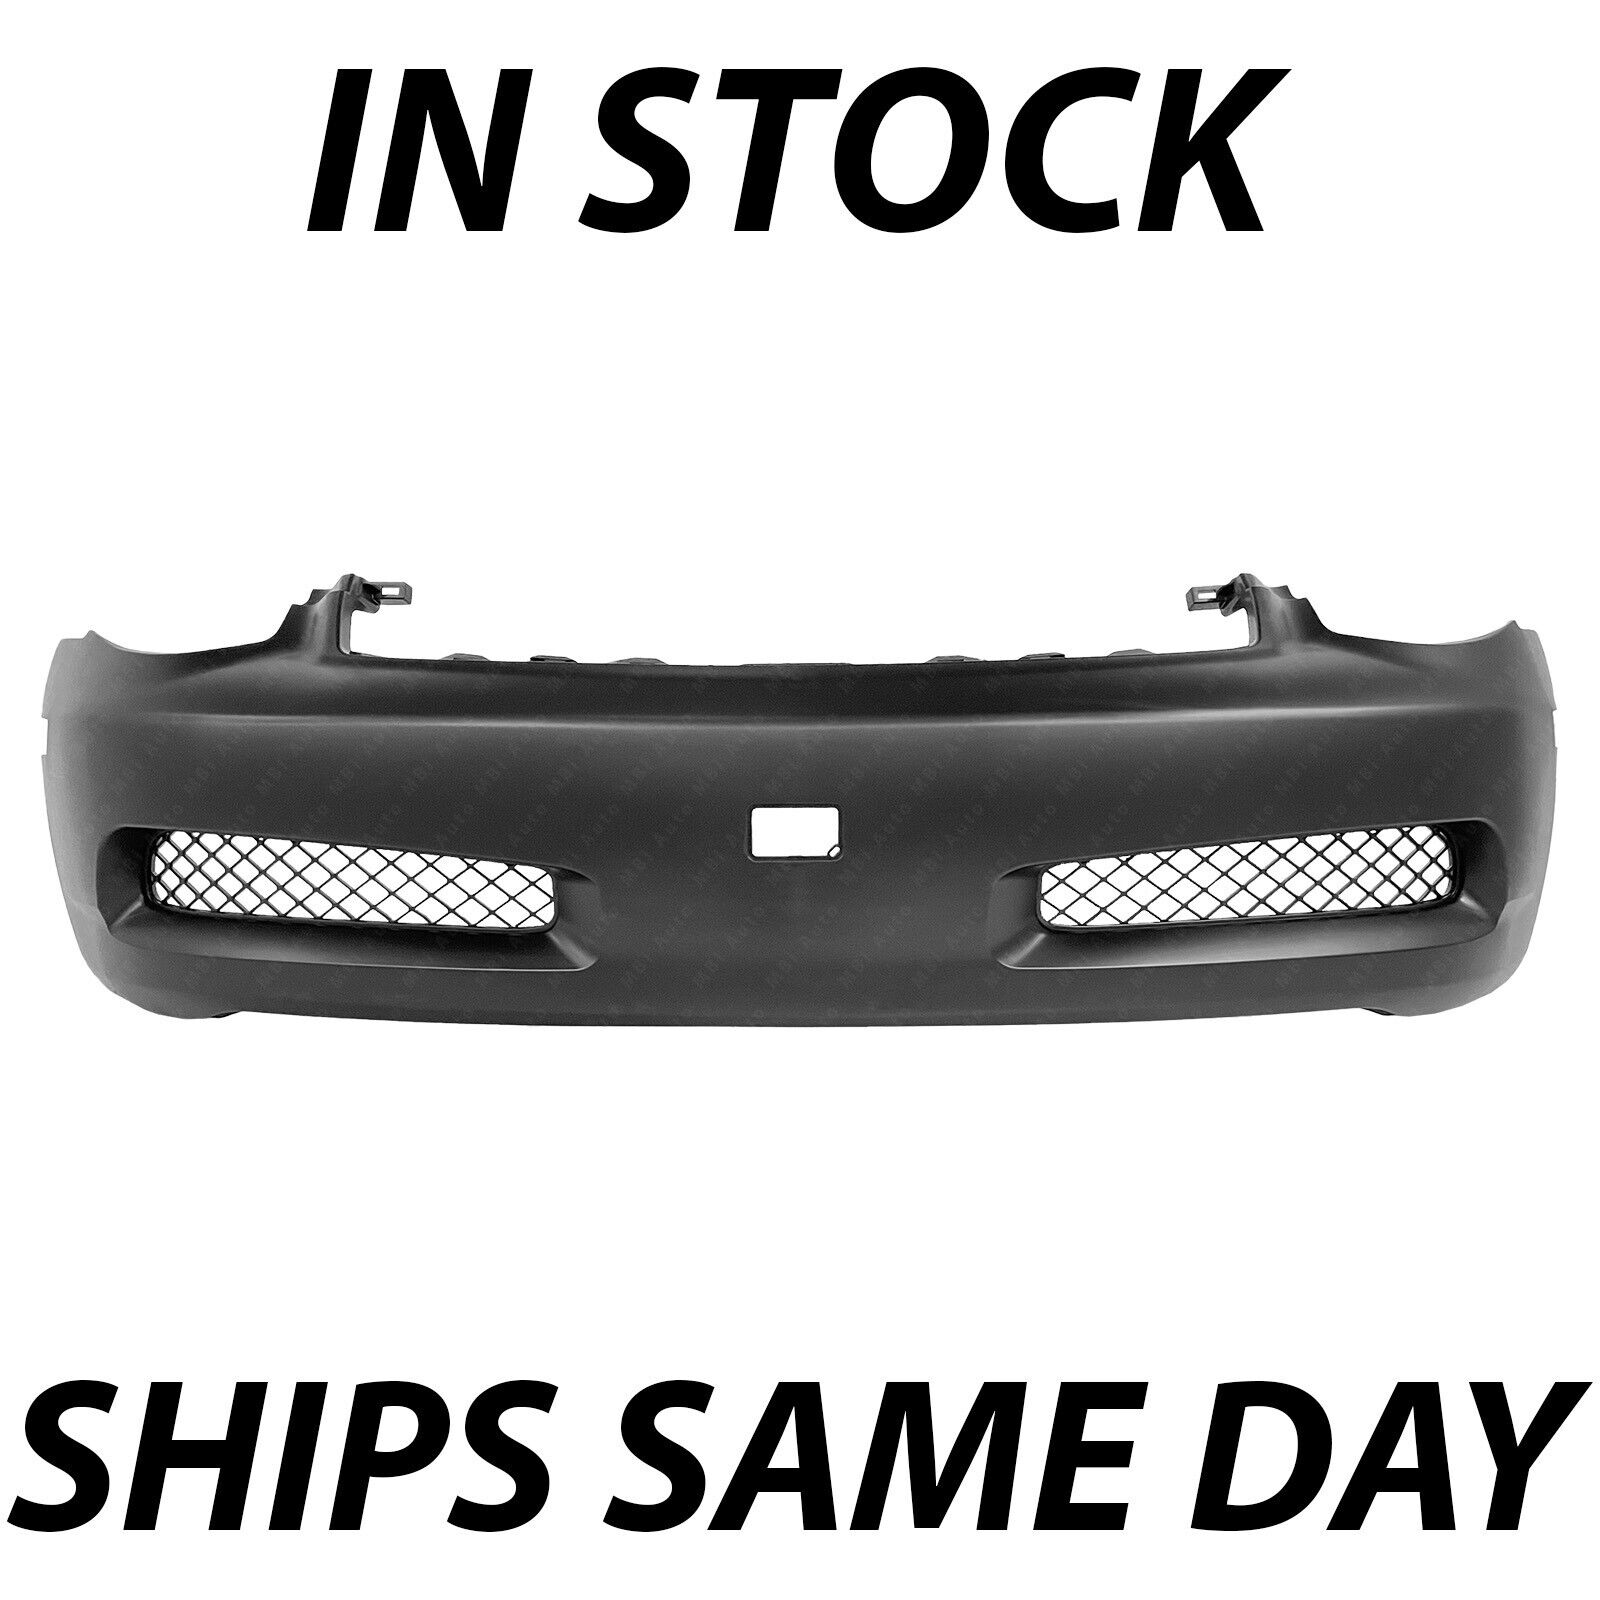 NEW - Primered Front Bumper Cover Fascia for 2003-2007 Infiniti G35 Coupe 03-07